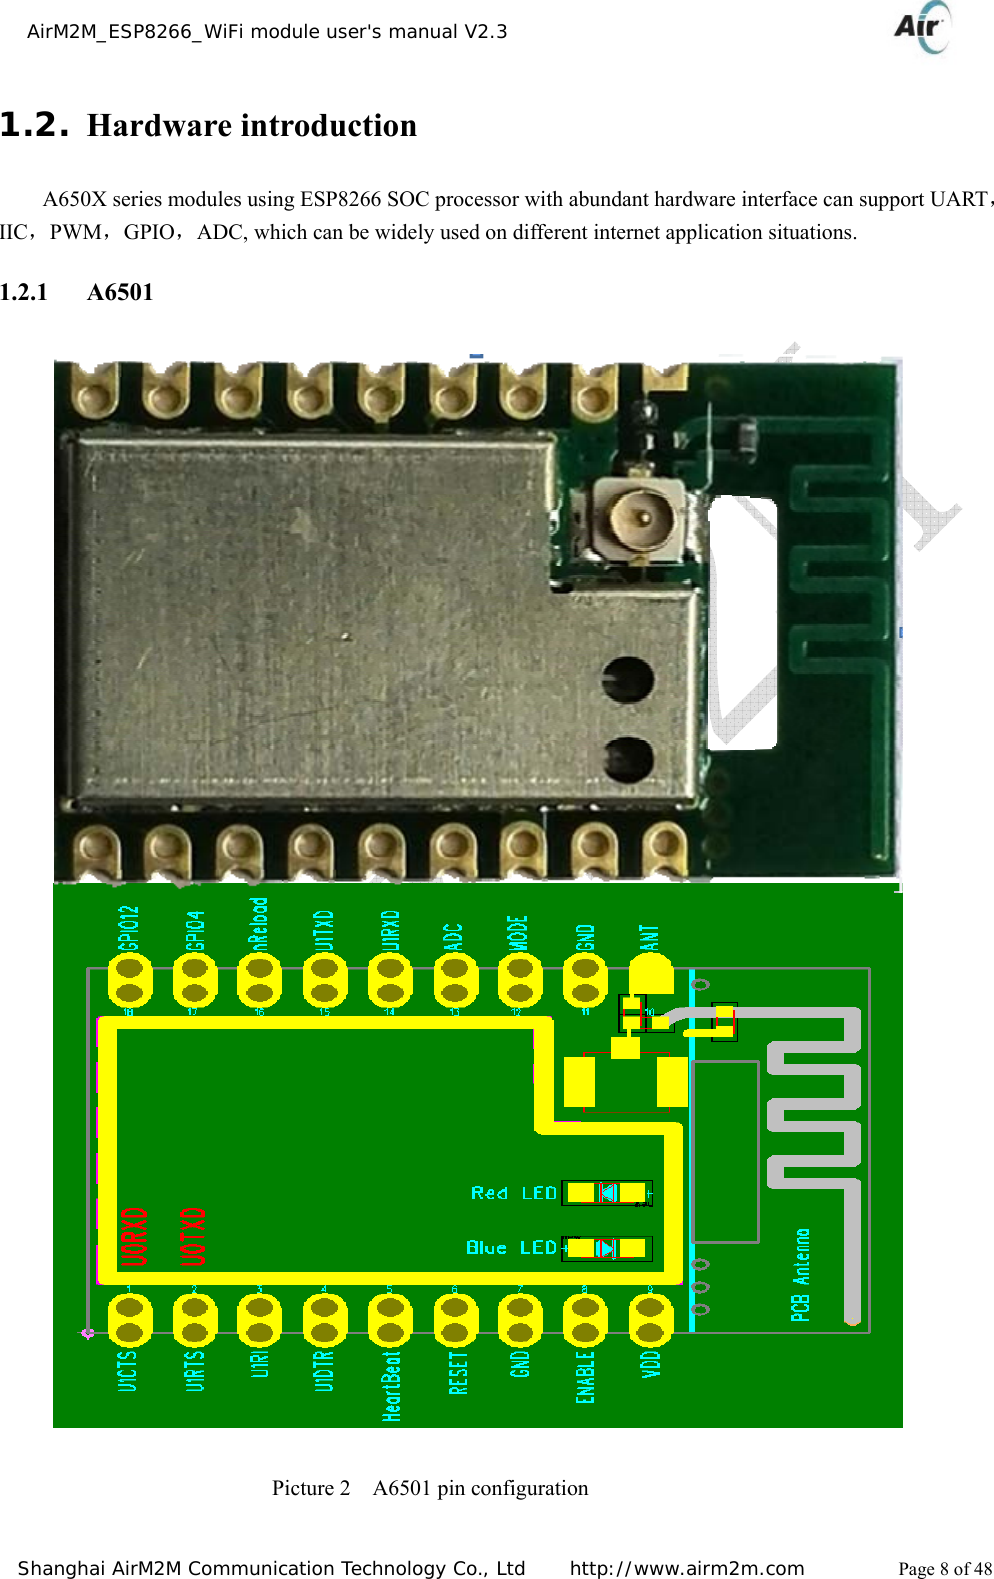    AirM2M_ESP8266_WiFi module user&apos;s manual V2.3   Shanghai AirM2M Communication Technology Co., Ltd     http://www.airm2m.com          Page 8 of 48 1.2. Hardware introduction A650X series modules using ESP8266 SOC processor with abundant hardware interface can support UART，IIC，PWM，GPIO，ADC, which can be widely used on different internet application situations. 1.2.1   A6501                                                                     Picture 2  A6501 pin configuration  